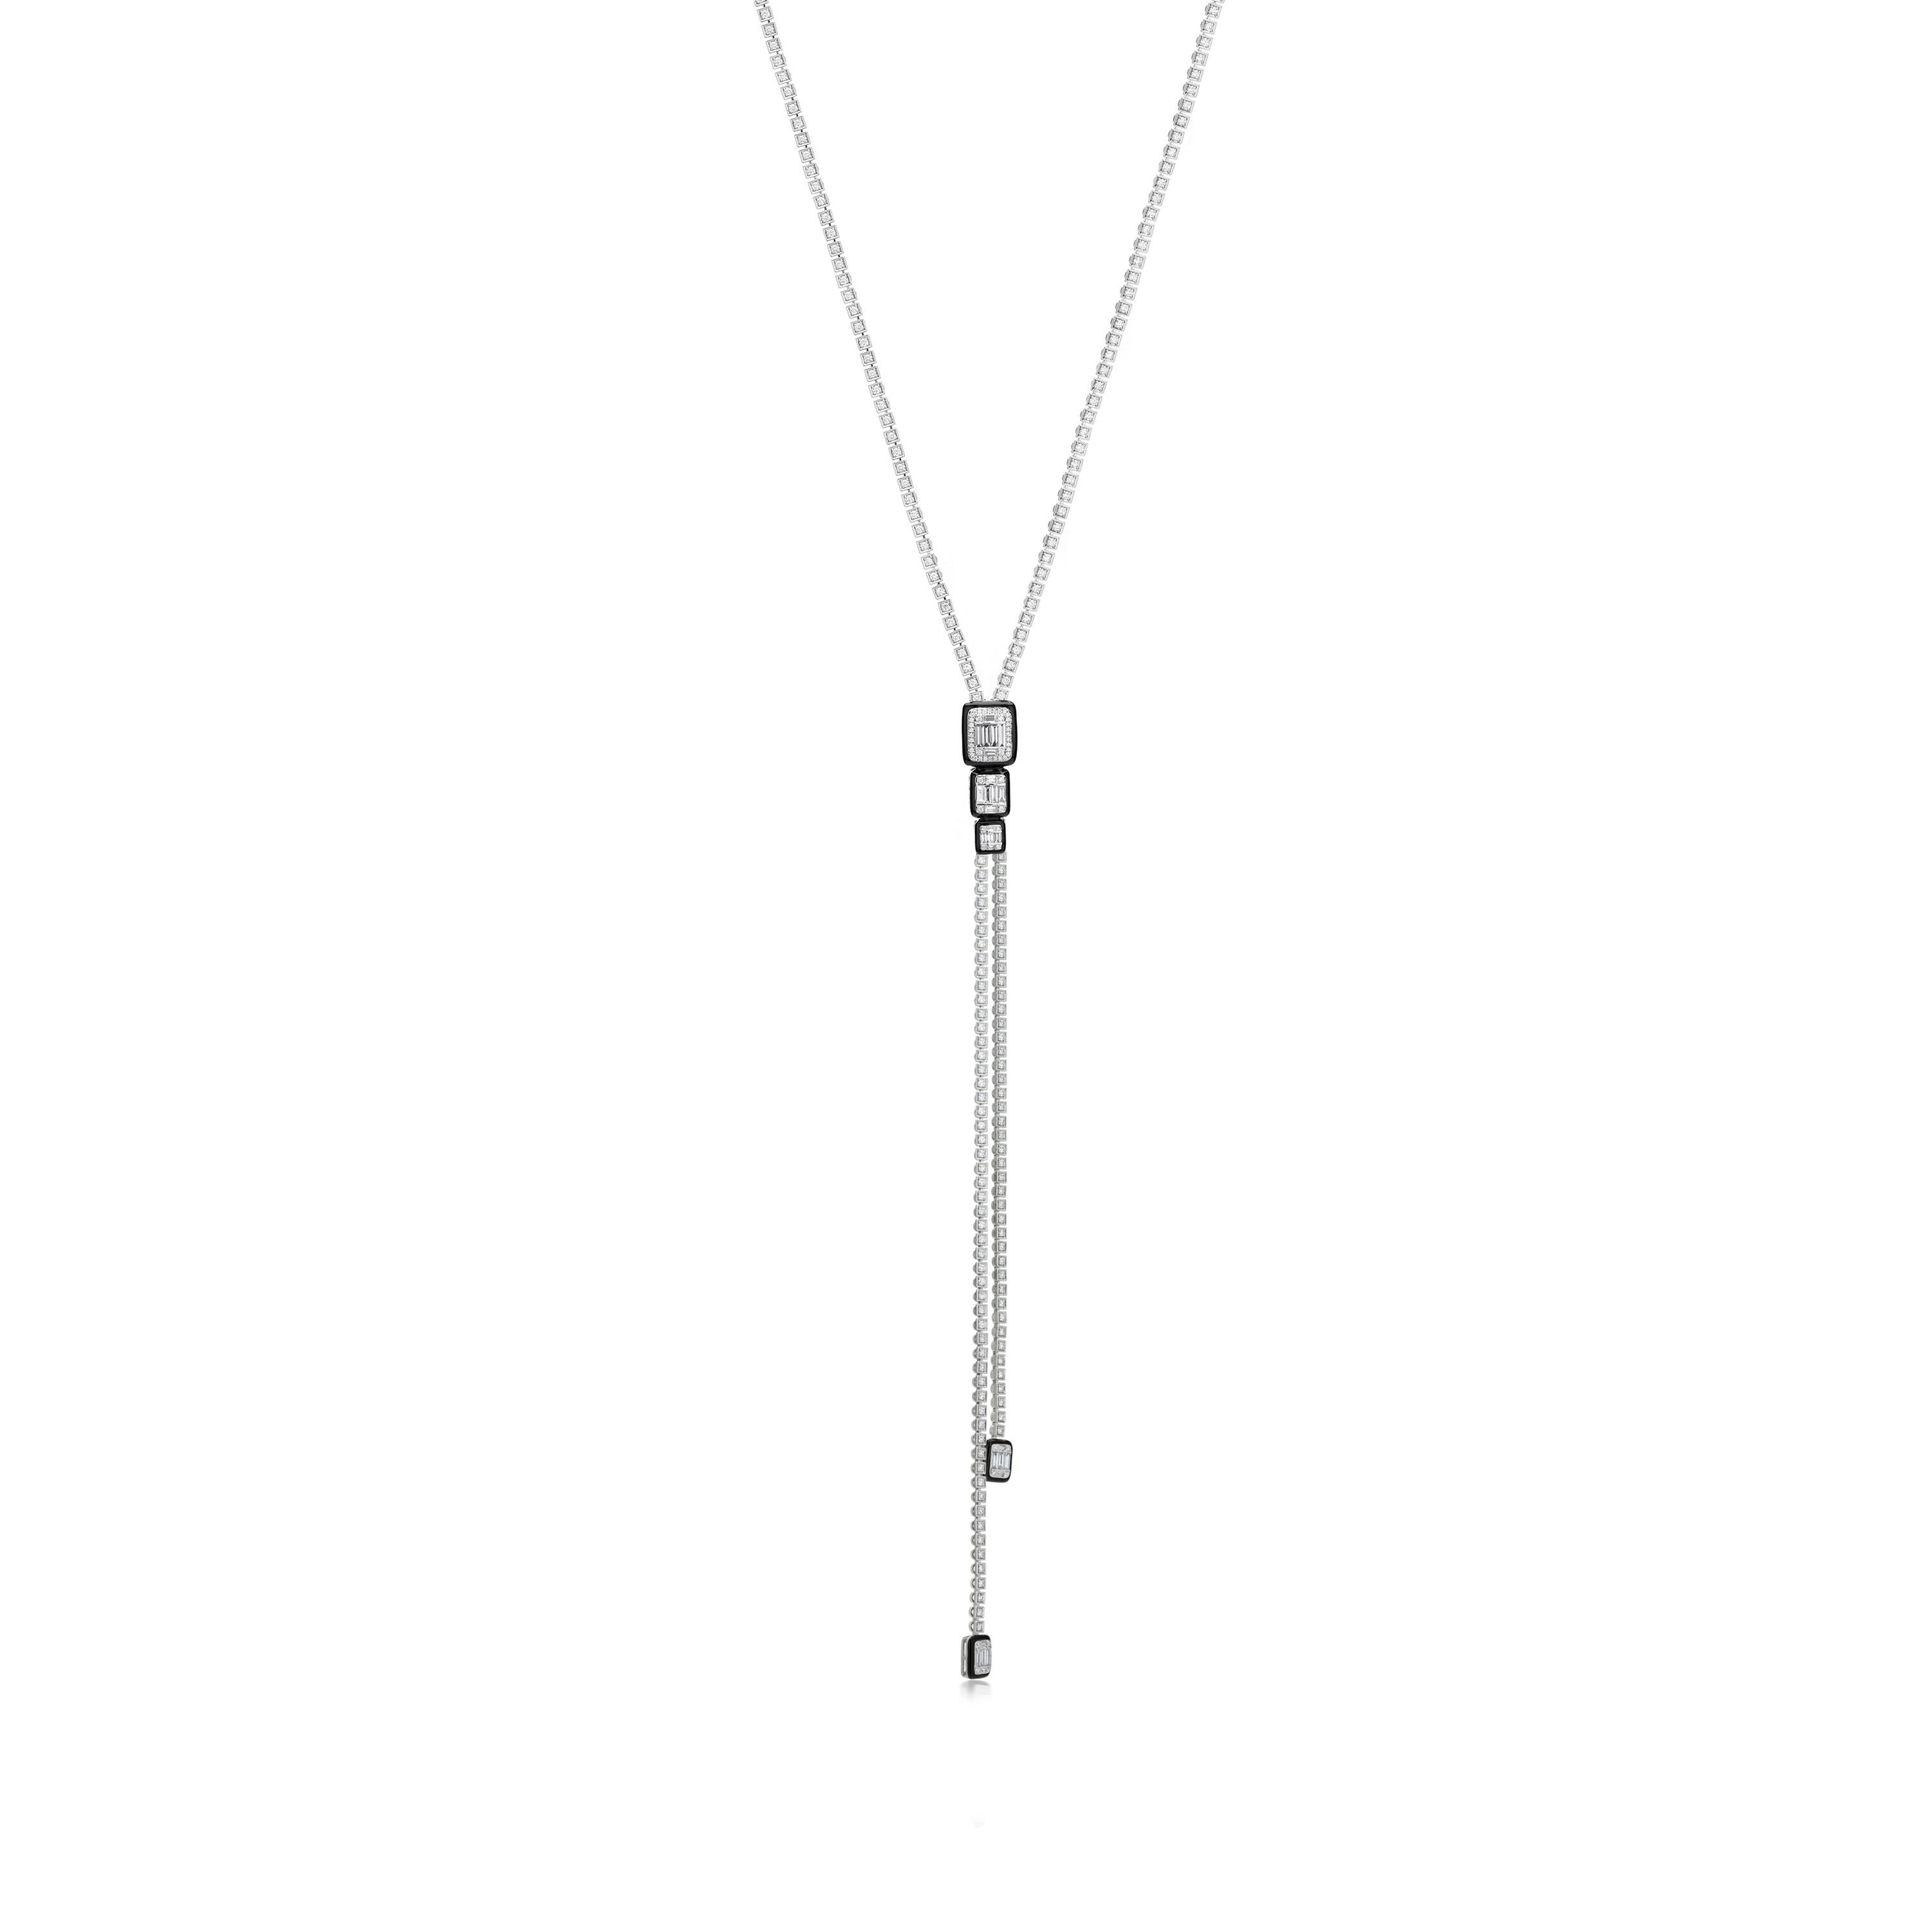 Baguette Cut Nigaam 7.31cttw, Diamond with 0.35cts, Enamel Long Chain Necklace in 18k Gold For Sale